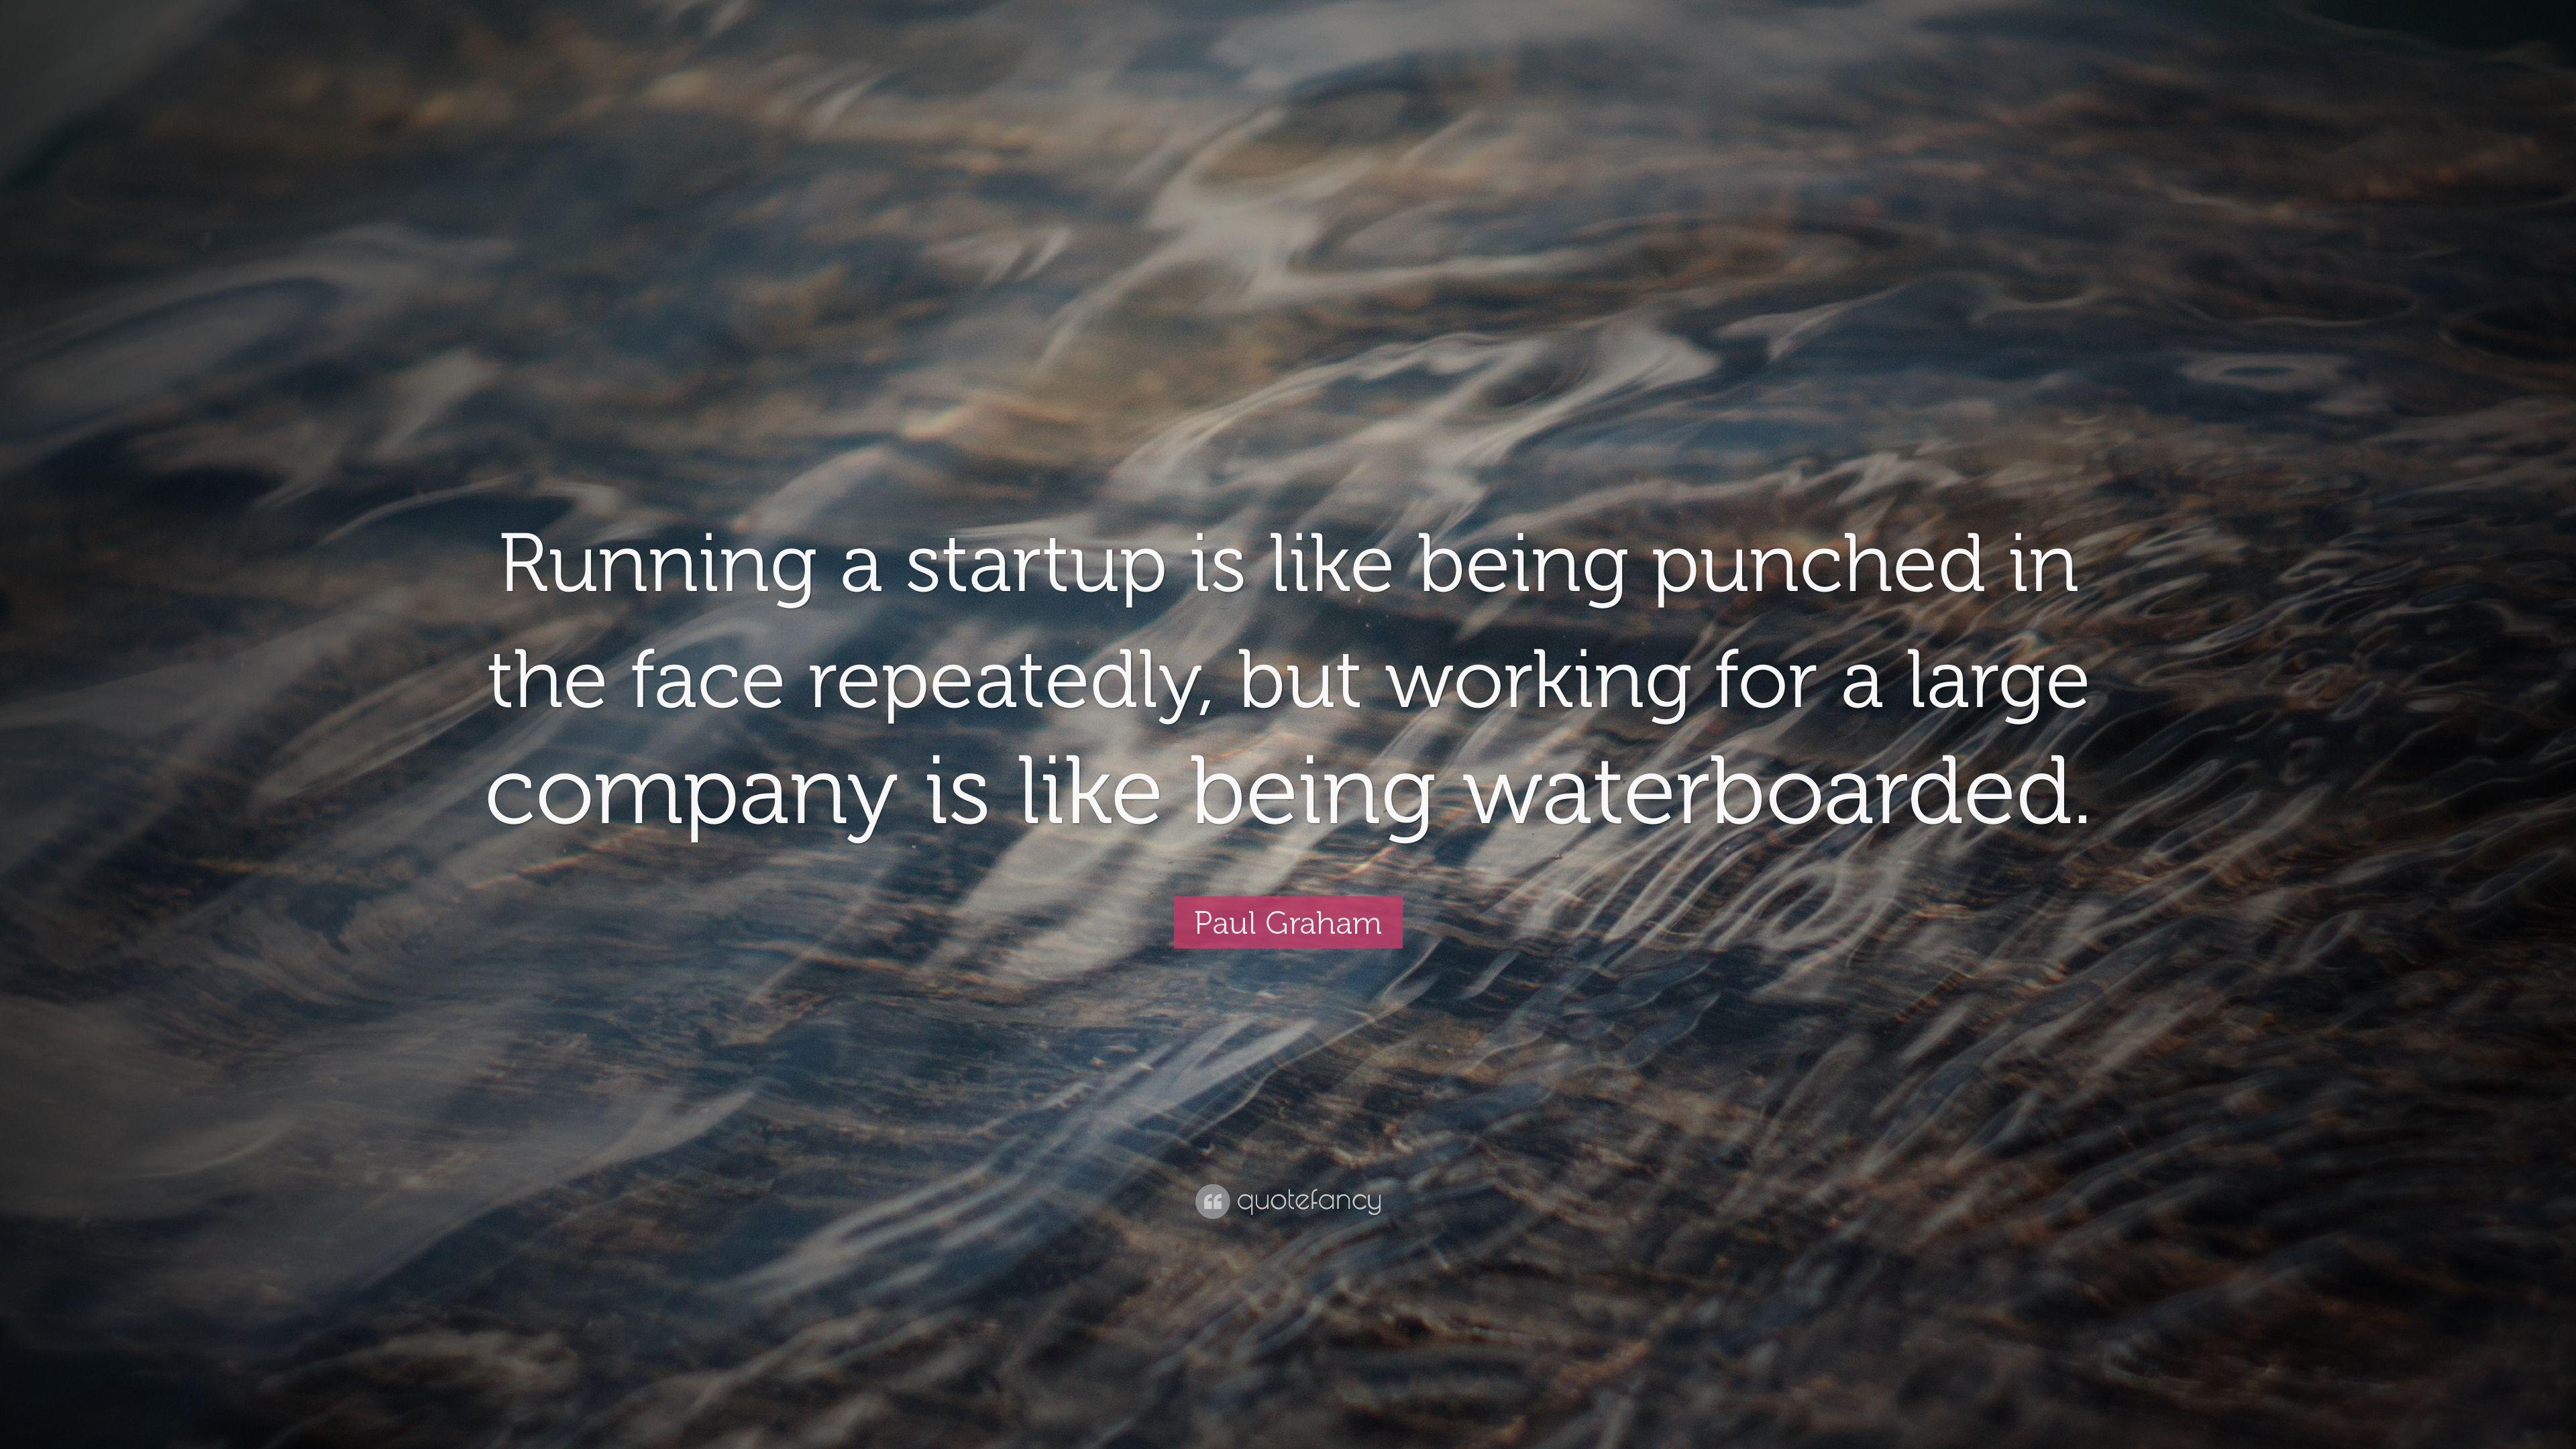 Paul Graham Quote: “Running a startup is like being punched in